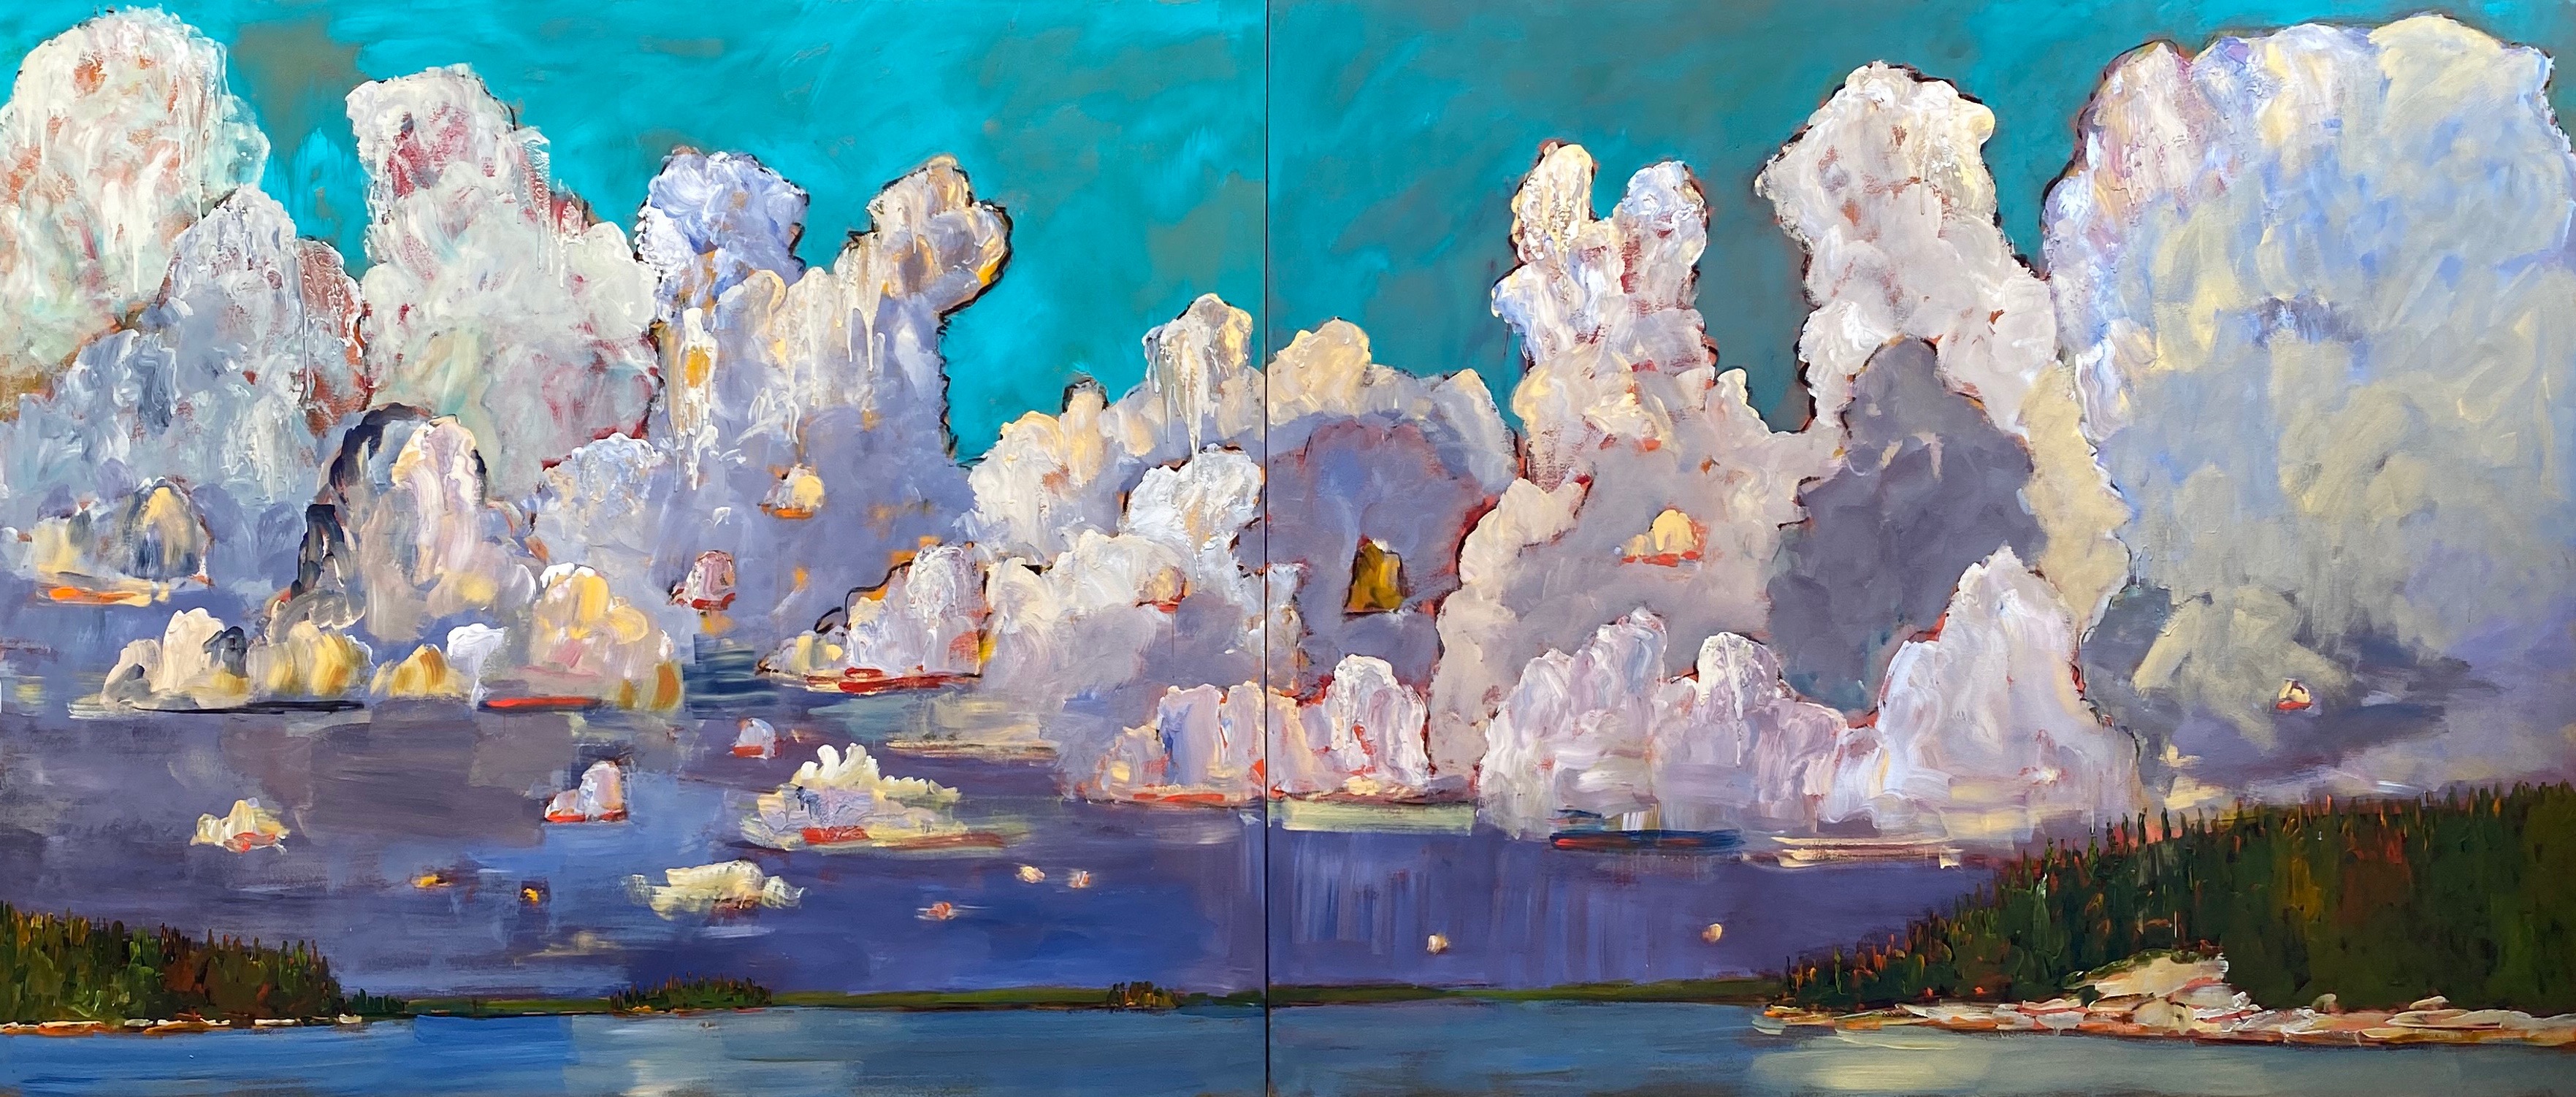 Opening Reception for Gregory Hardy: The Clouds Above